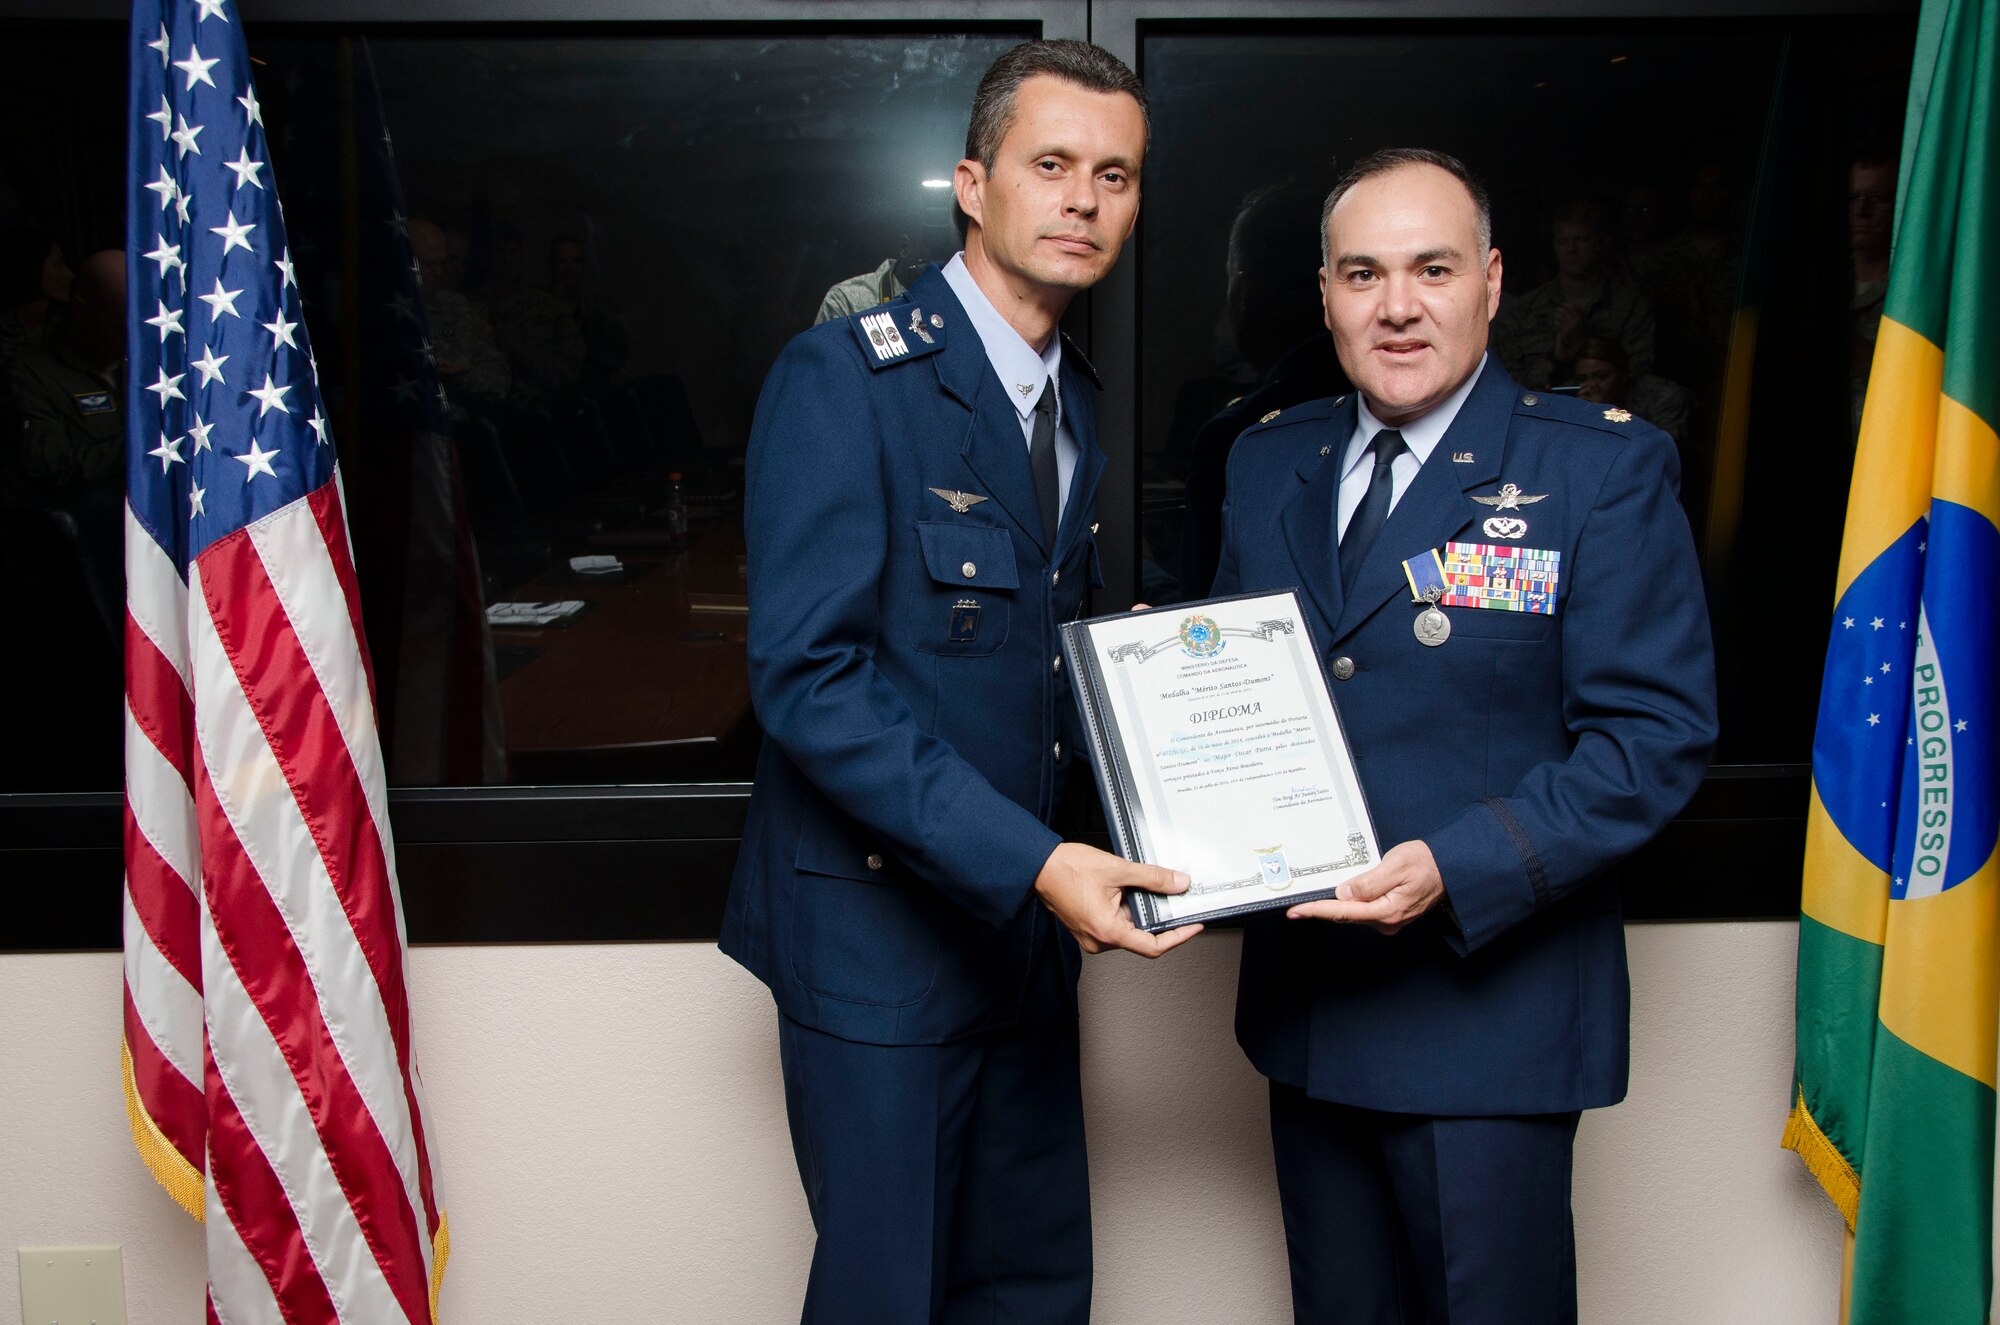 Col Alexandre Alves, Brazilian Air Force Liaison Officer to 12th Air Force (Air Forces Southern) presents Maj. Oscar Parra, 12th Air Force (Air Forces Southern) Regional Affairs Strategist, with the Brazilian Air Force Santos-Dumont Medal before a staff meeting on Oct. 22, 2014 at Davis-Monthan AFB, Ariz. The medal is granted by the commander of the Brazilian Air Force, General Juniti Saito, to individuals who have made valuable contributions to the Brazilian Air Force. Parra’s dedication has directly influenced the success of several bilateral engagements, utilizing his personal and professional knowledge of international relations to move the mission forward; to include working with his leadership in order to advocate for emerging events, not initially available for the Brazilian Air Force. (U.S. Air Force photo by Staff Sgt. Adam Grant/Released)